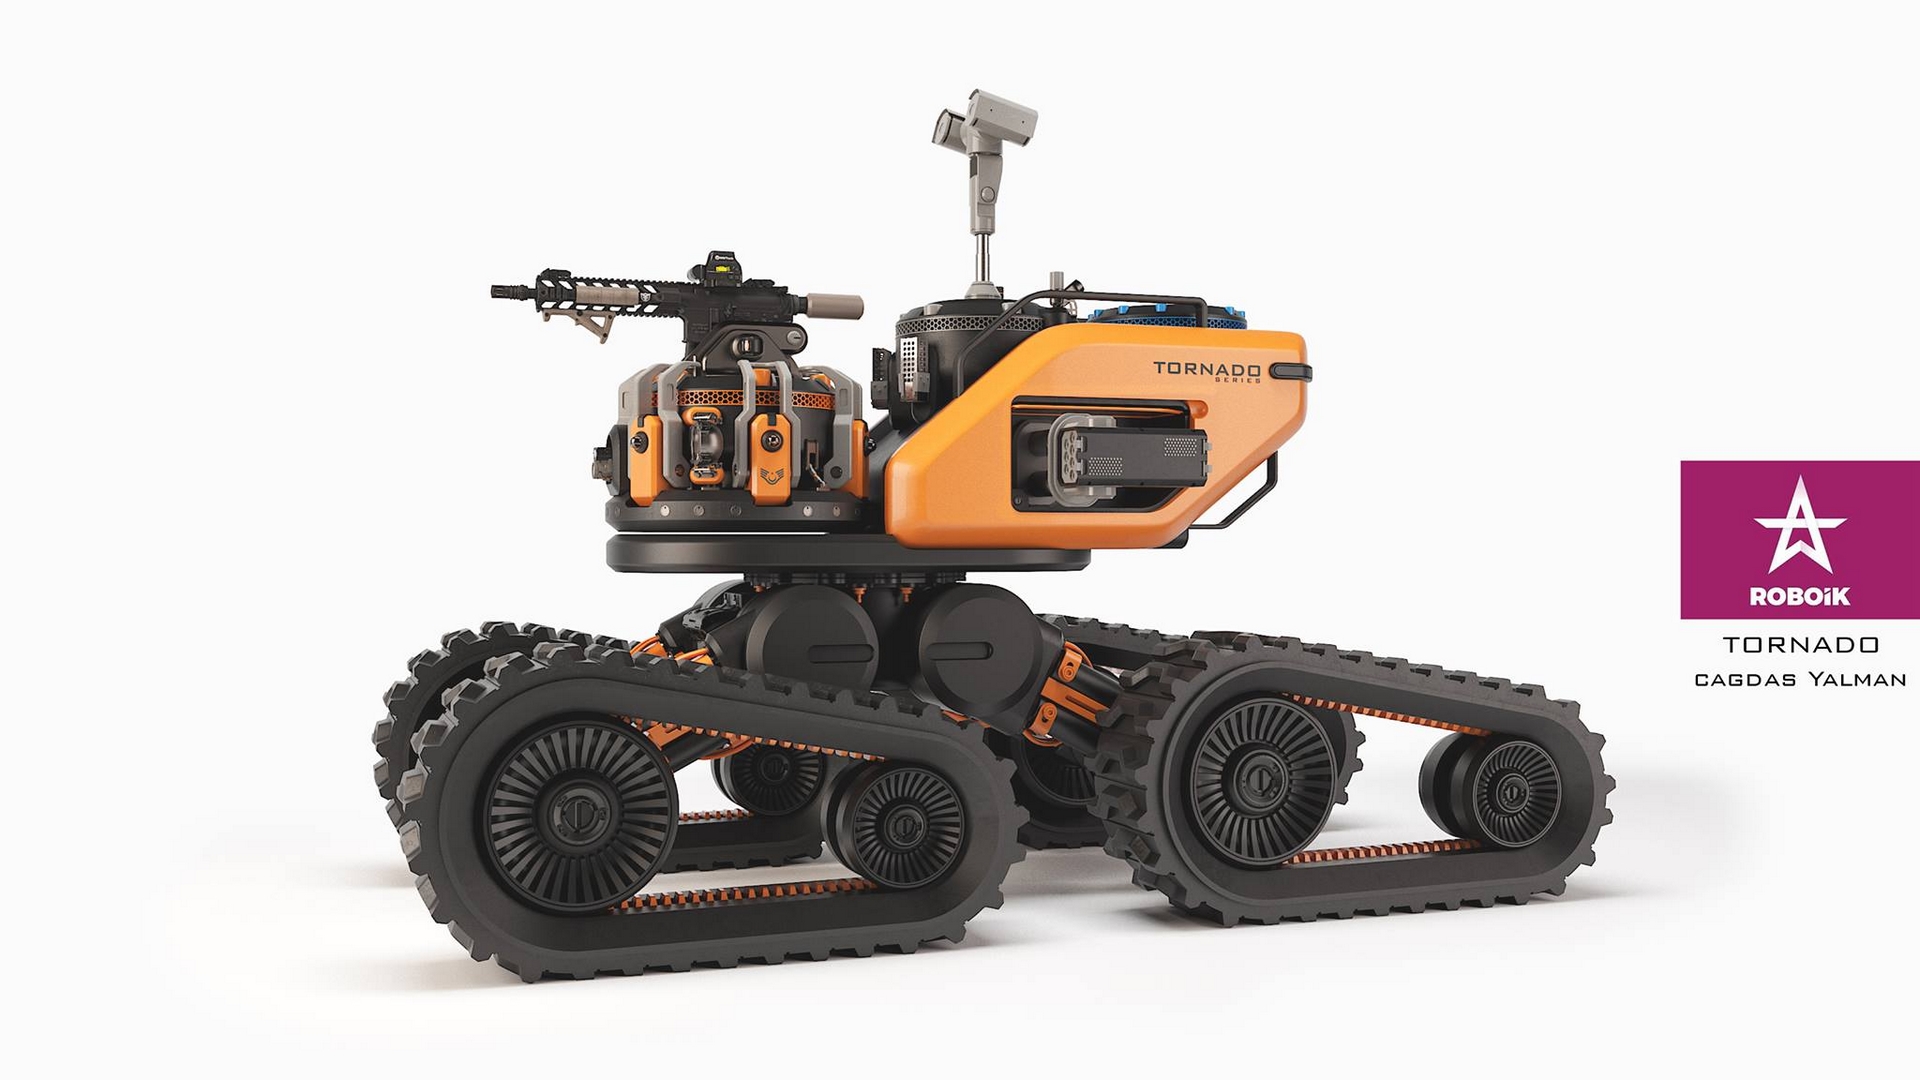 Unmanned Ground Vehicles Wallpapers